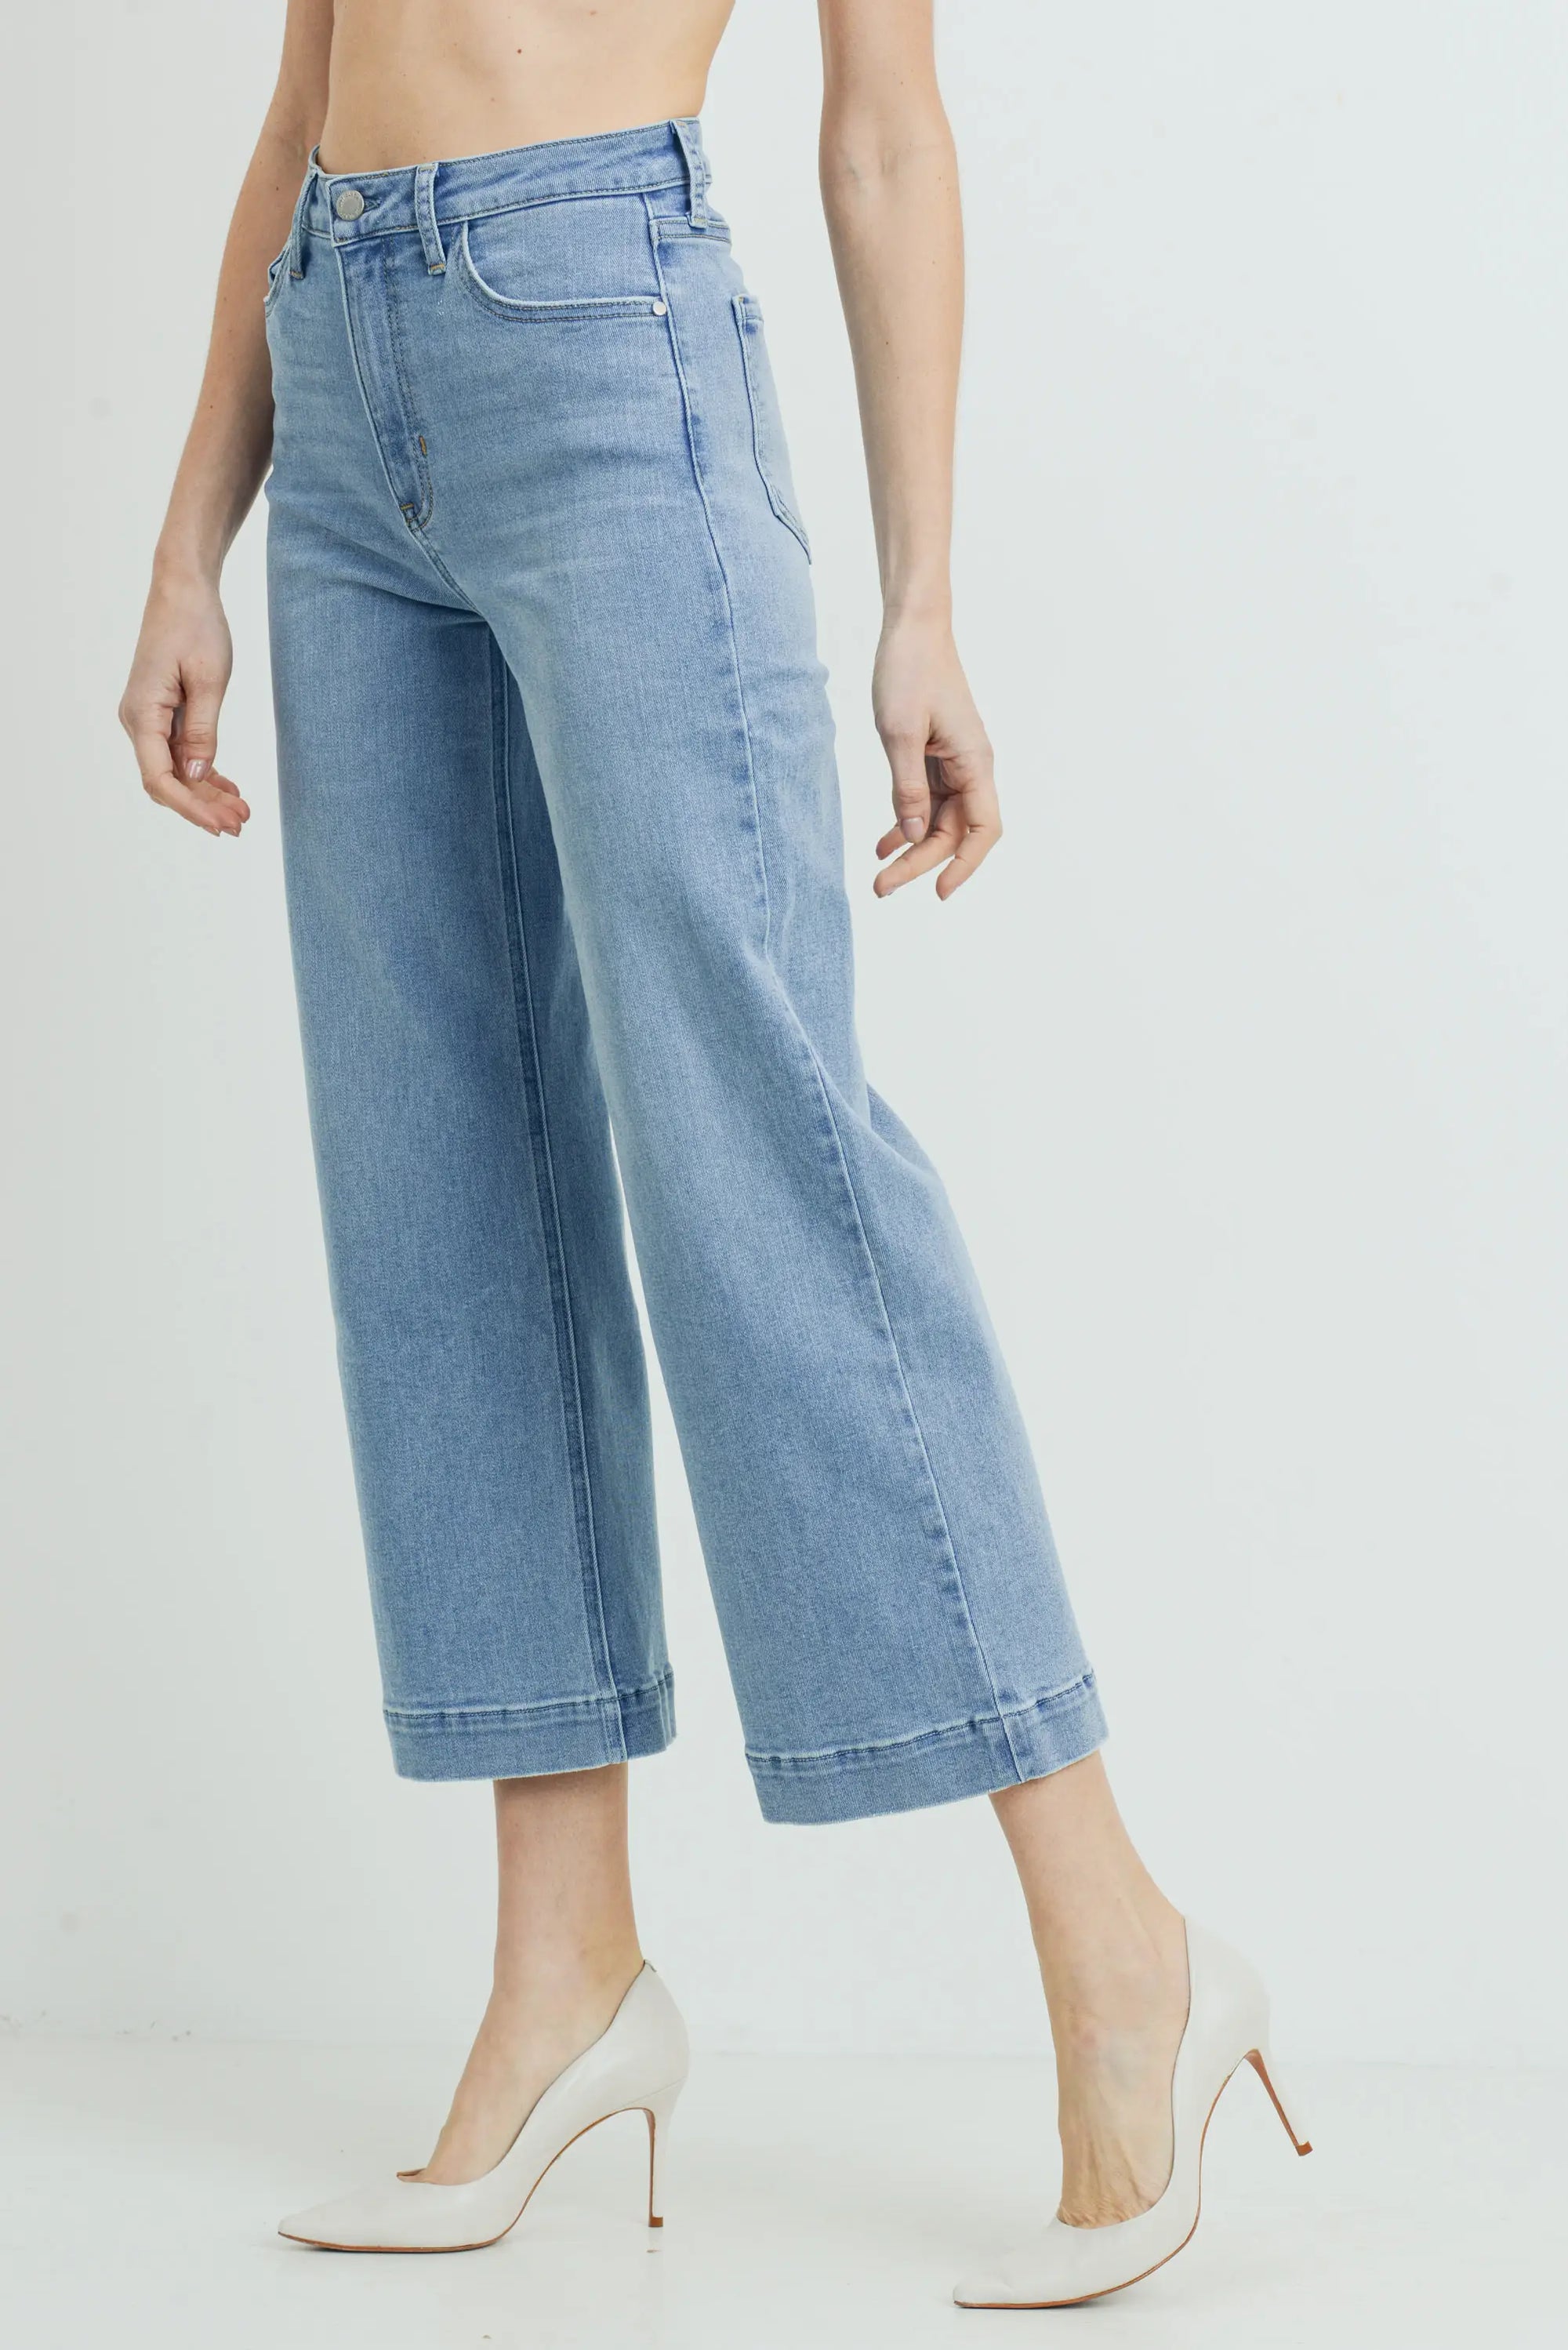 The Brandy Cropped Wide Leg Jeans by Just Black Denim